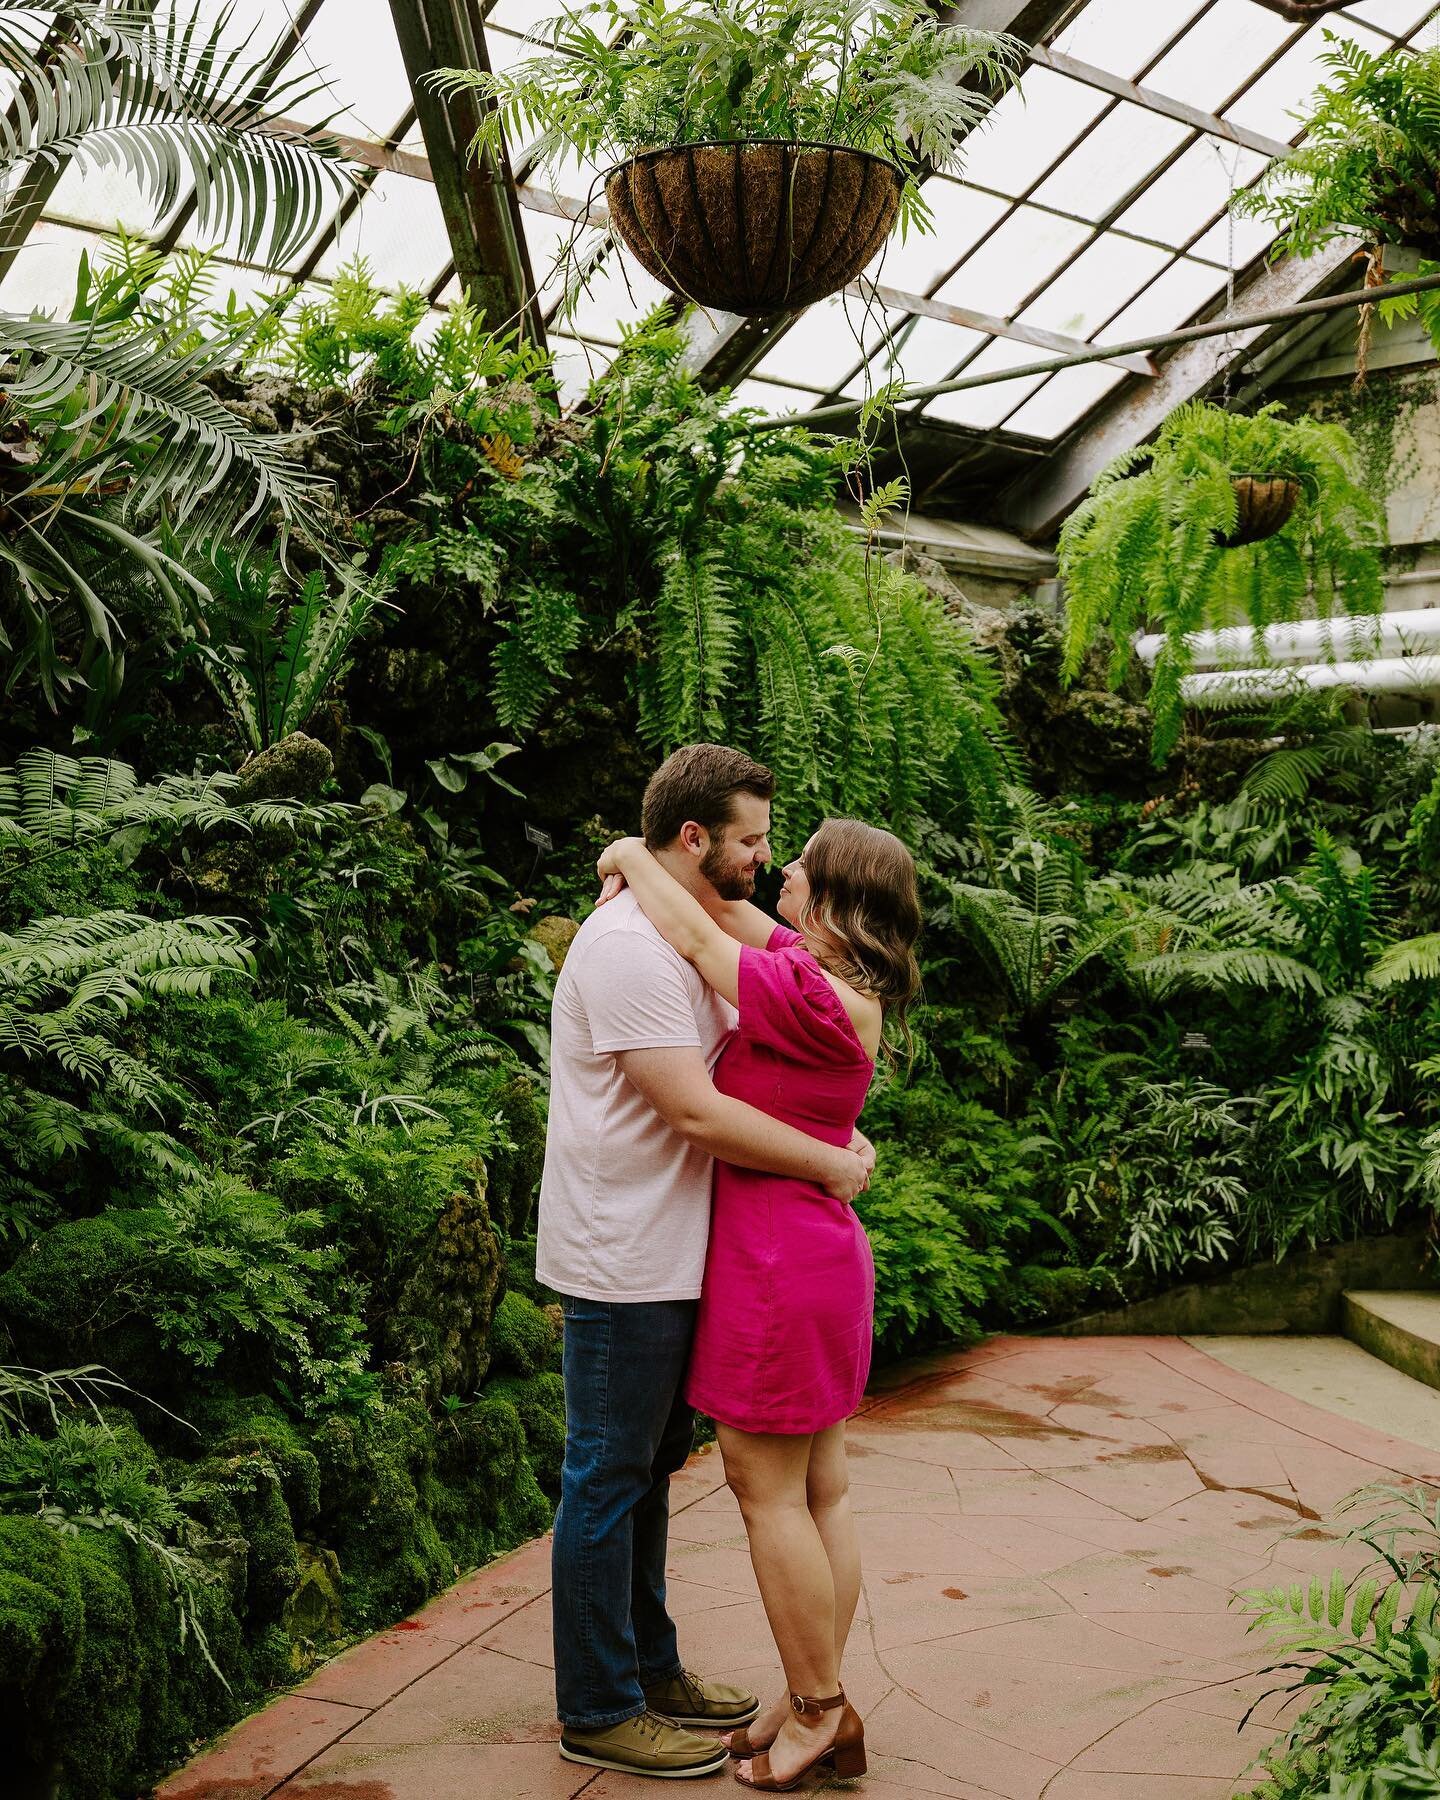 I couldn&rsquo;t be more excited that the color is back in Chicago and summer is right around the corner. Though I&rsquo;m definitely thankful I got a jumpstart to the greenery earlier this spring thanks to a few couples who chose conservatories as t